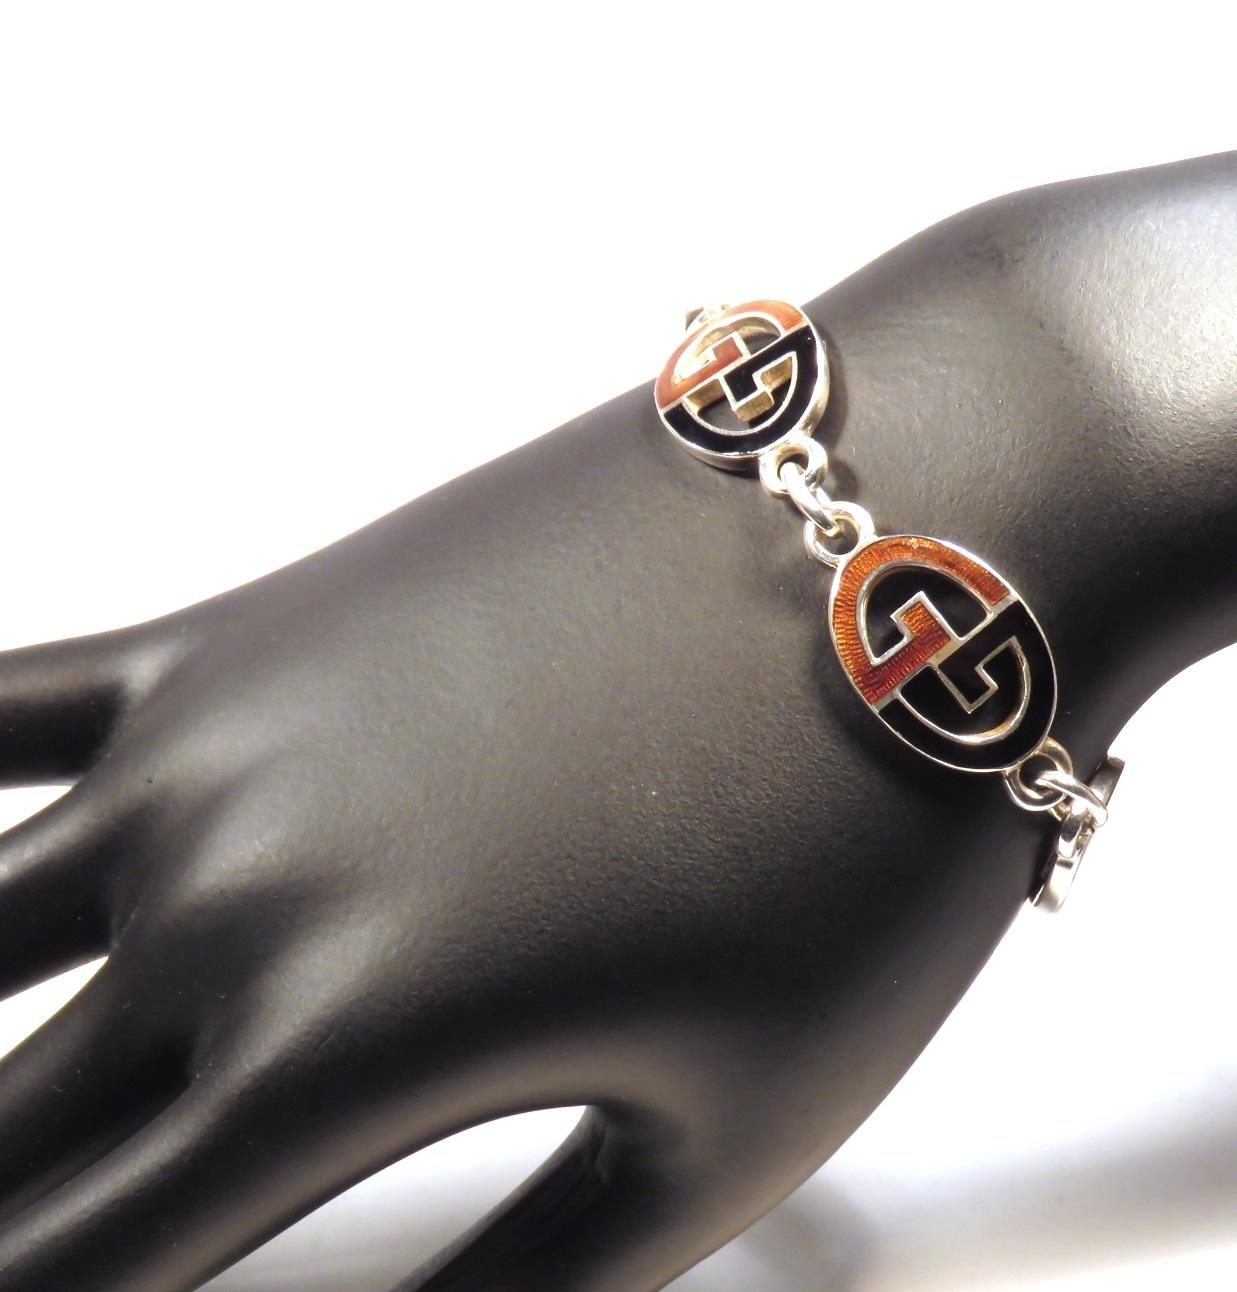 Rare iconic vintage Gucci's bracelet handcrafted in Italy in sterling silver with black and brown enamel.The total length of the bracelet is 170 mm / 6.692 inches. Marked with the Italian sterling silver mark 925 and the brandmark Gucci